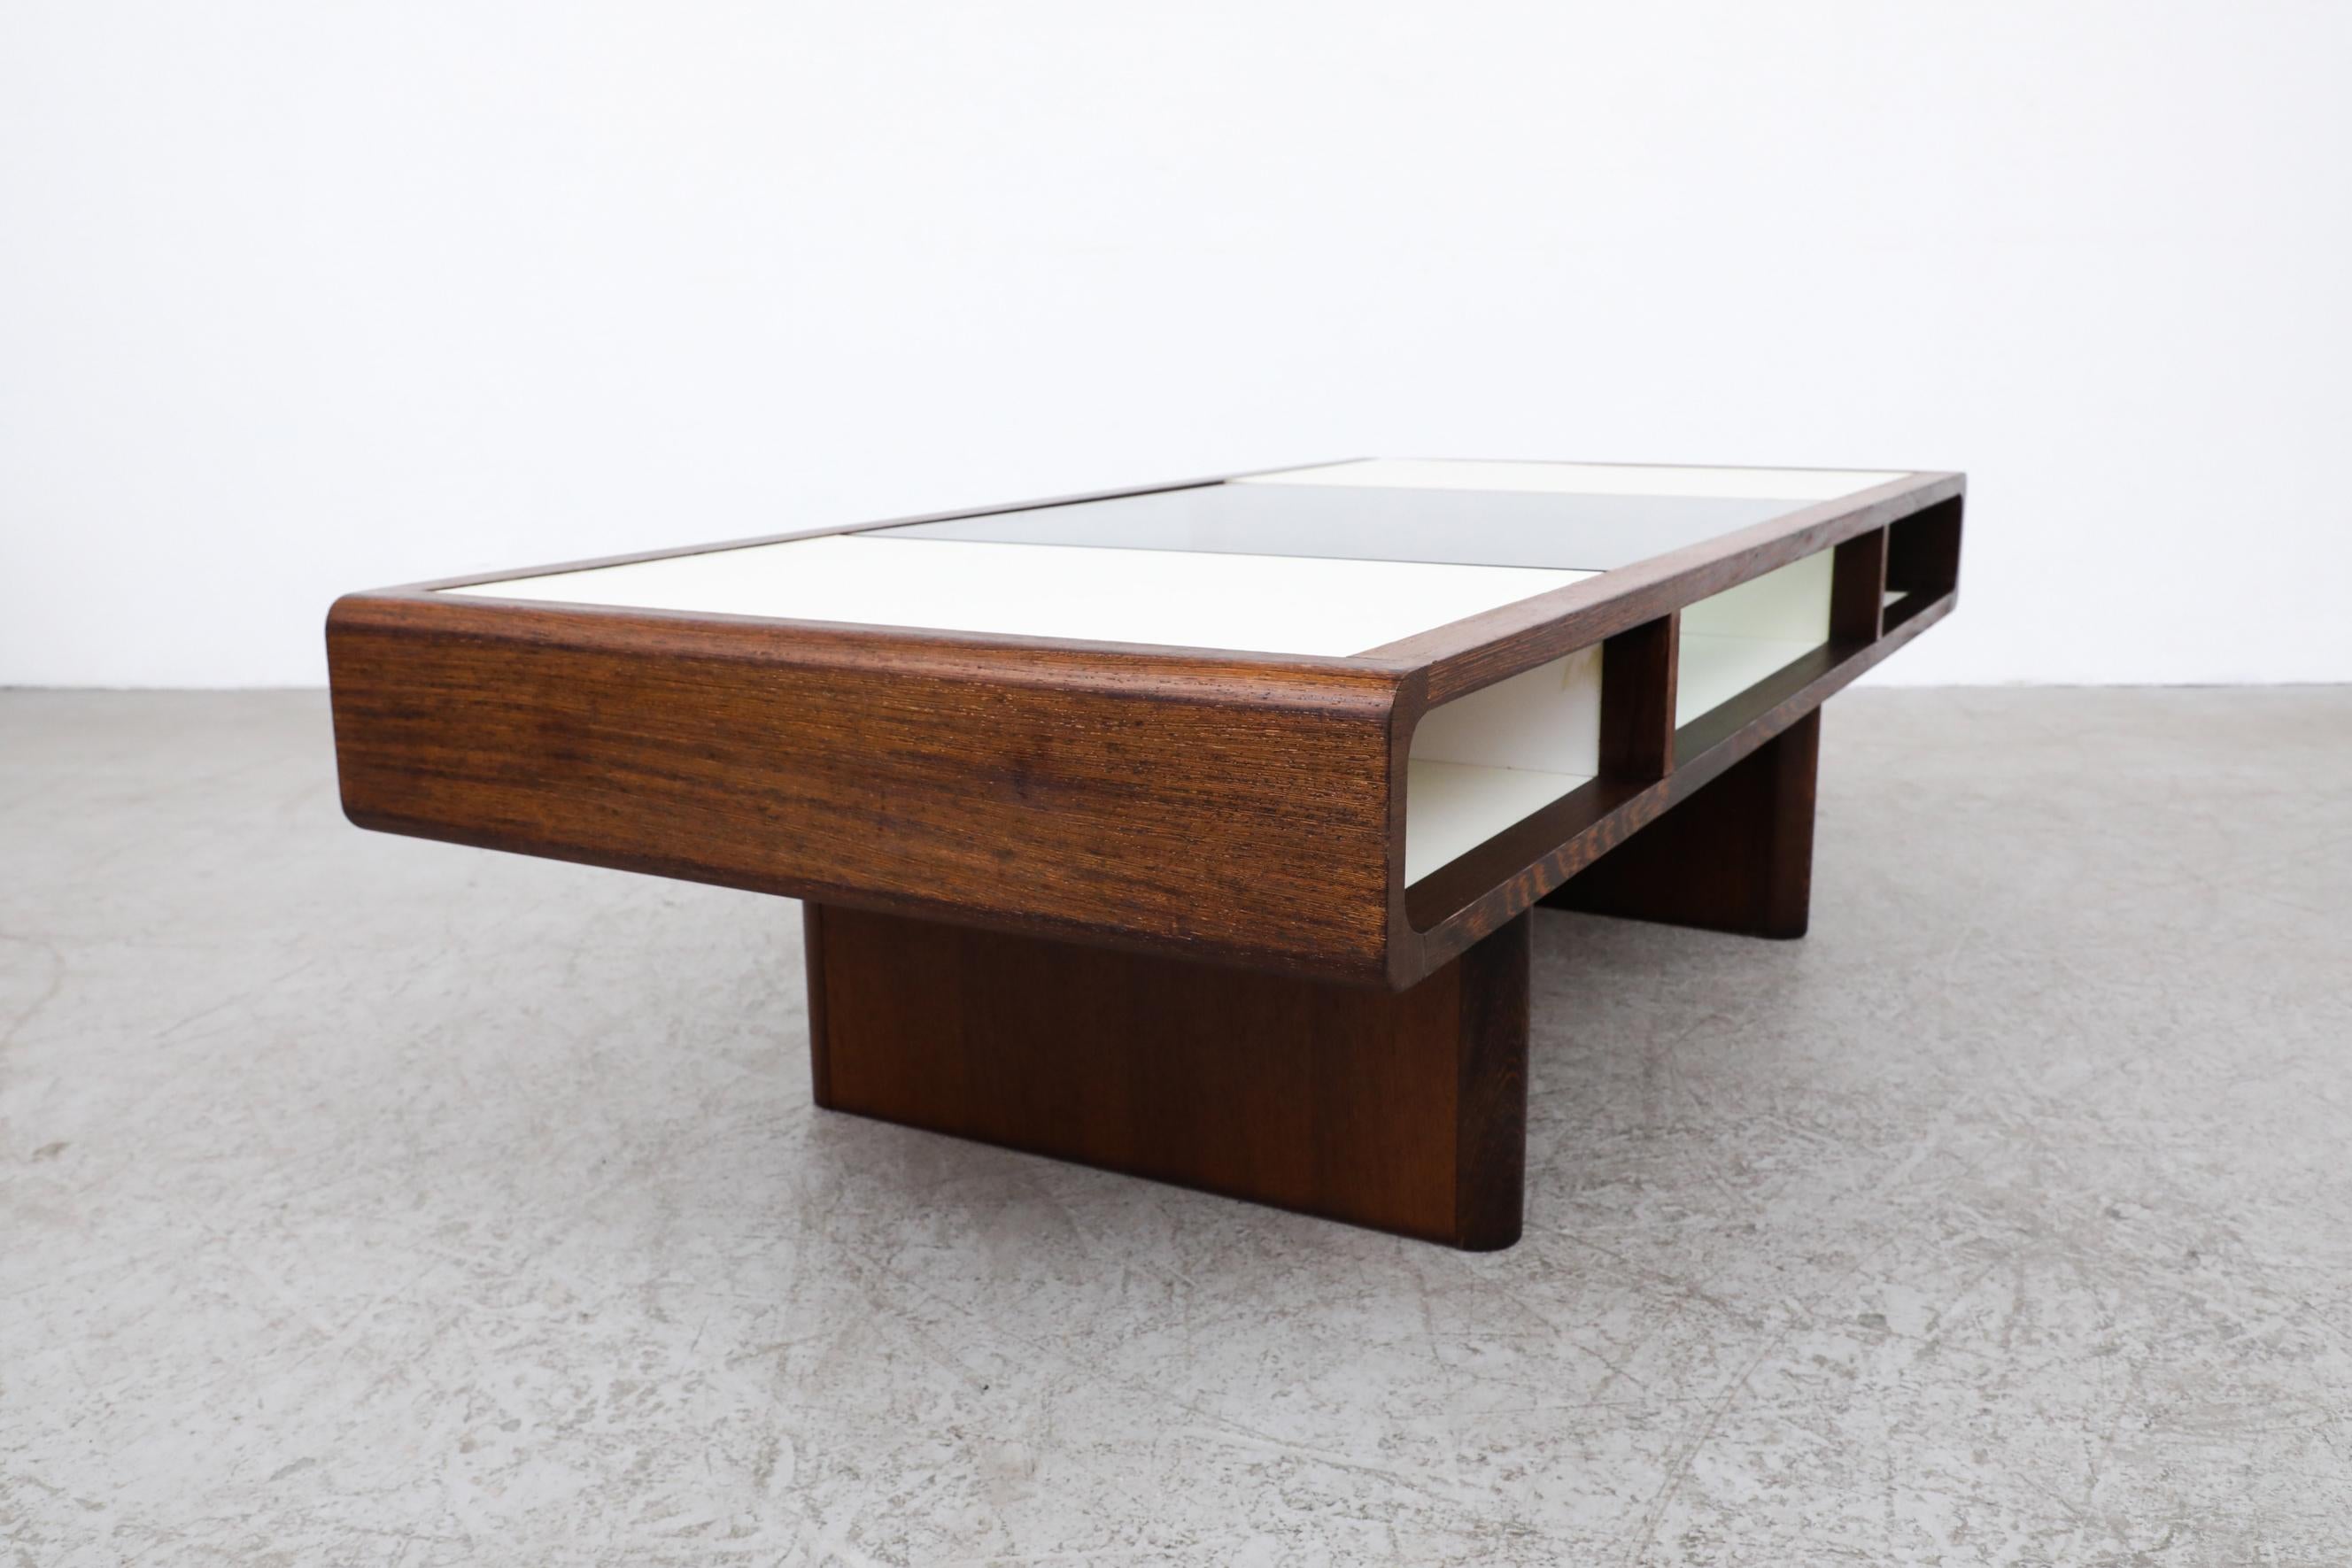 Smoked Glass Jean Maneval Style Wenge and White Coffee Table